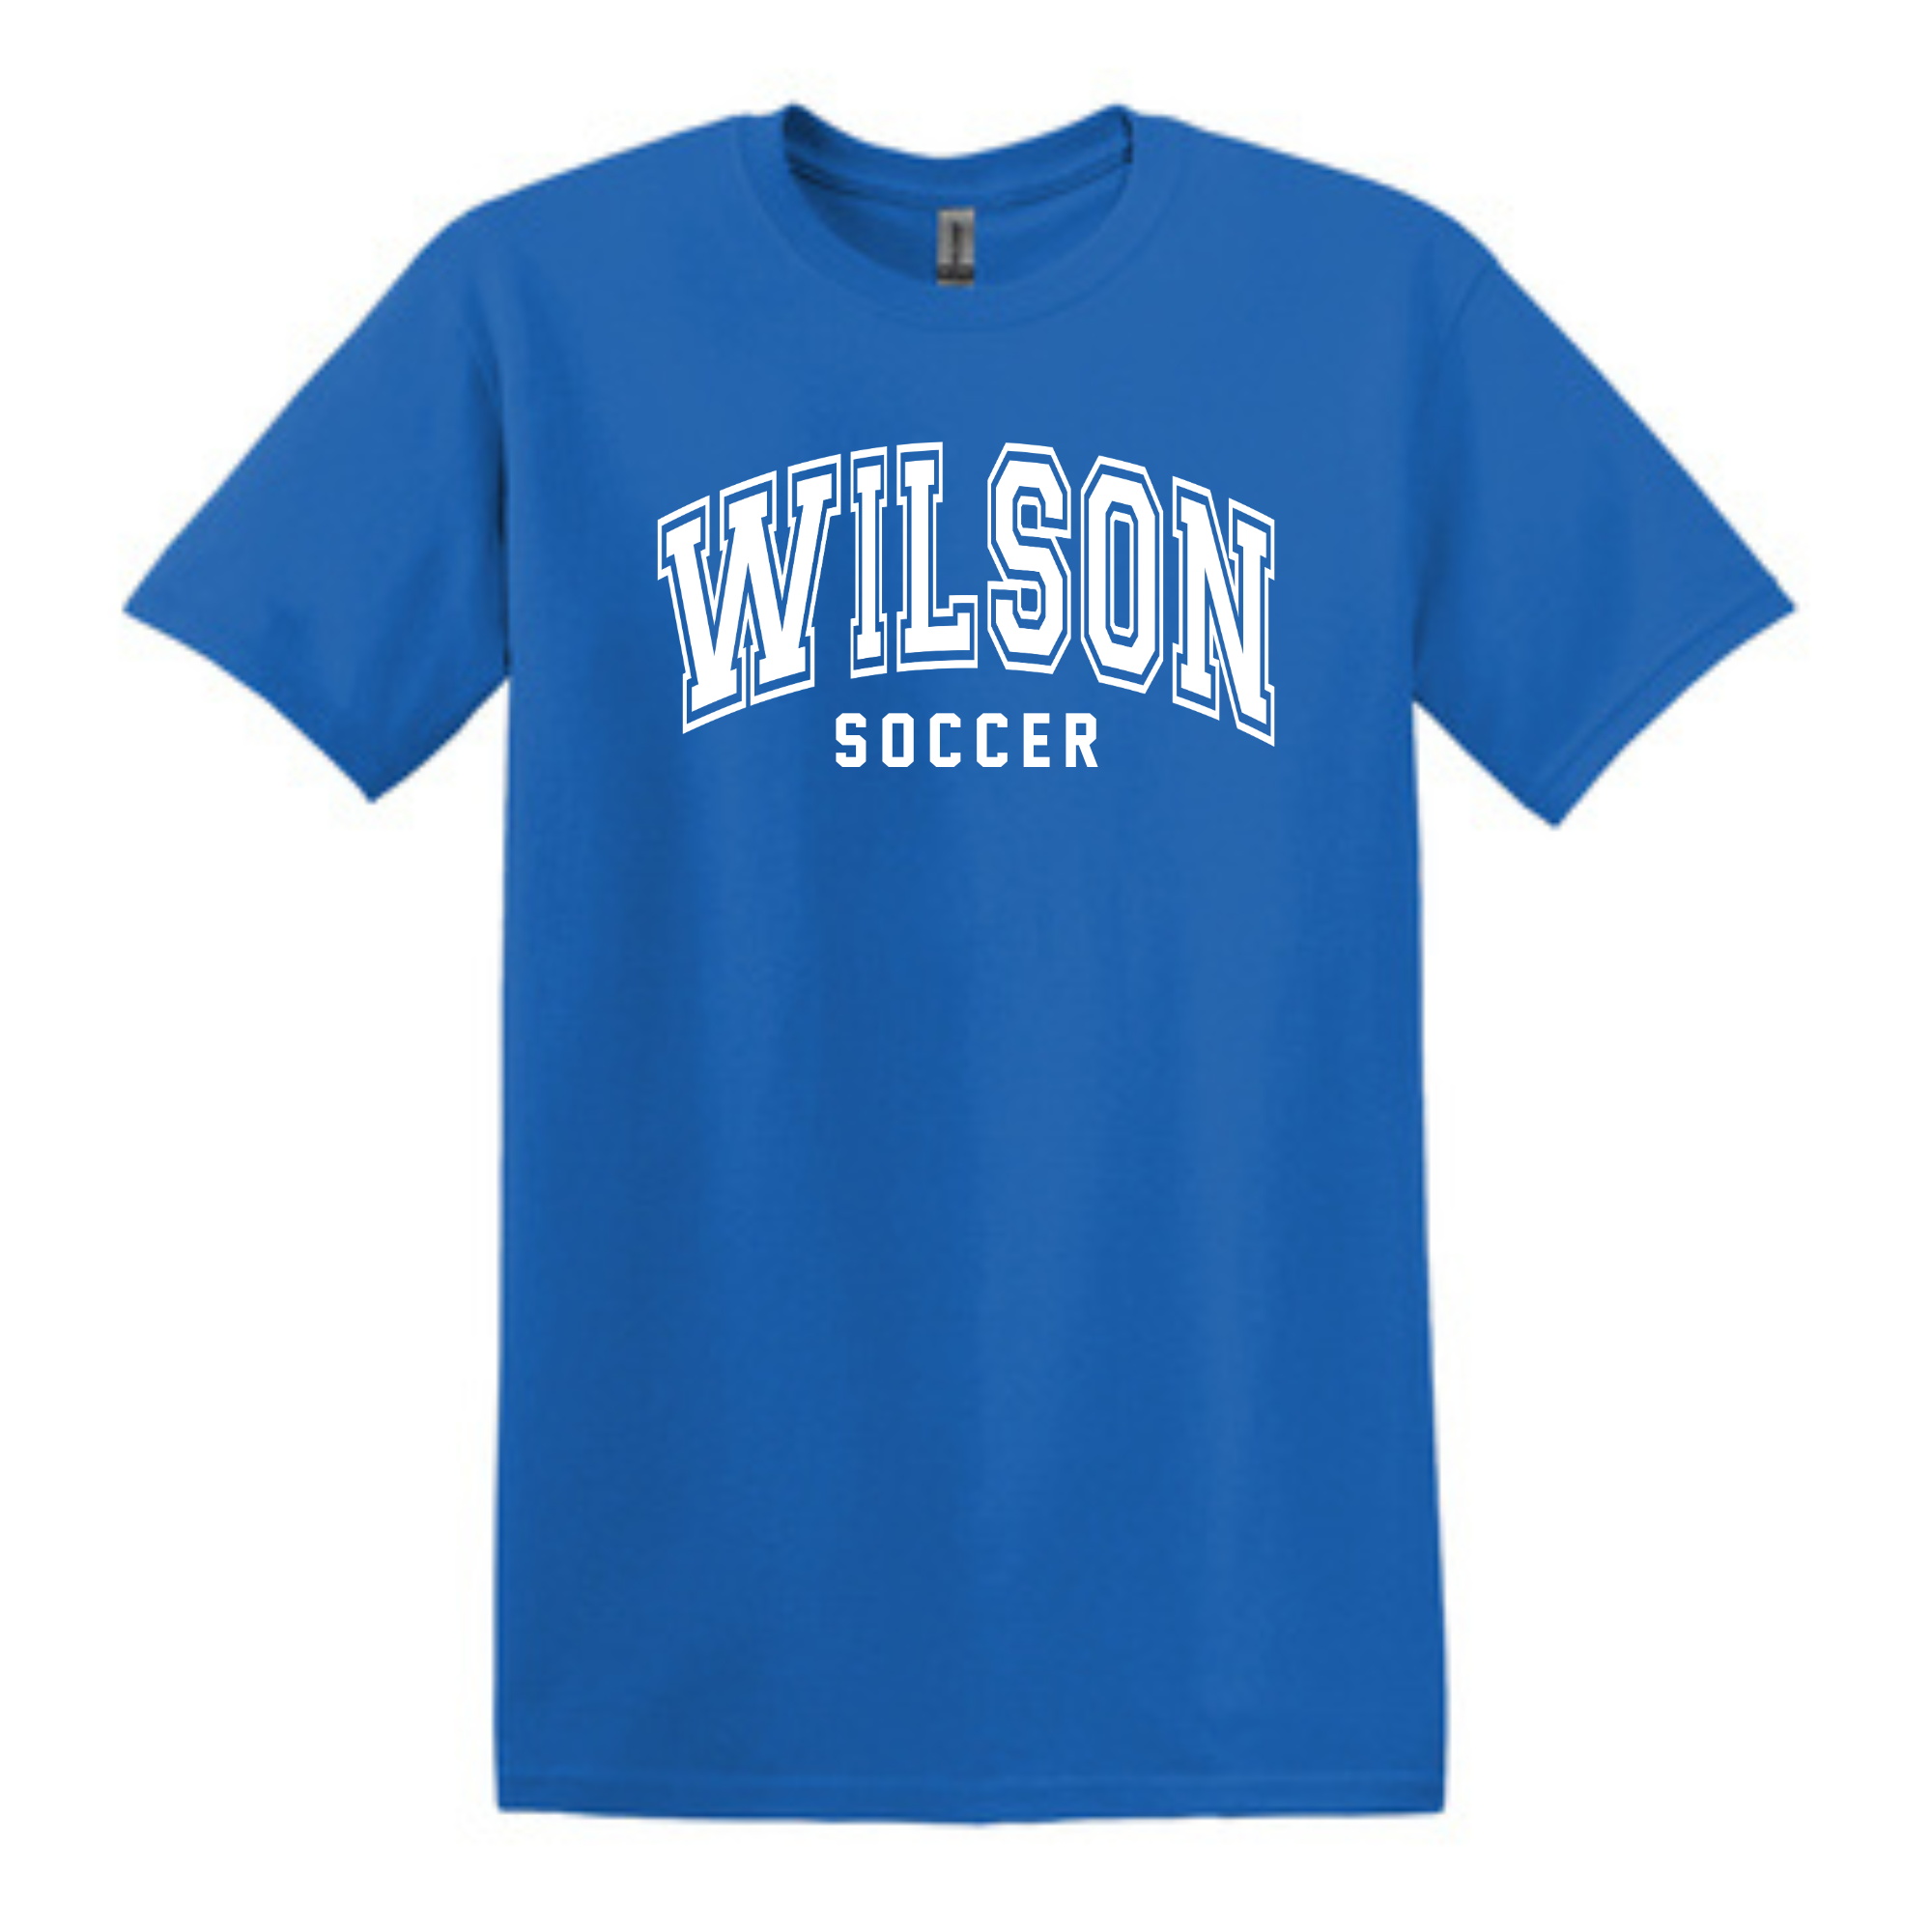 Wilson Soccer Arched Collegiate Tee- 64000